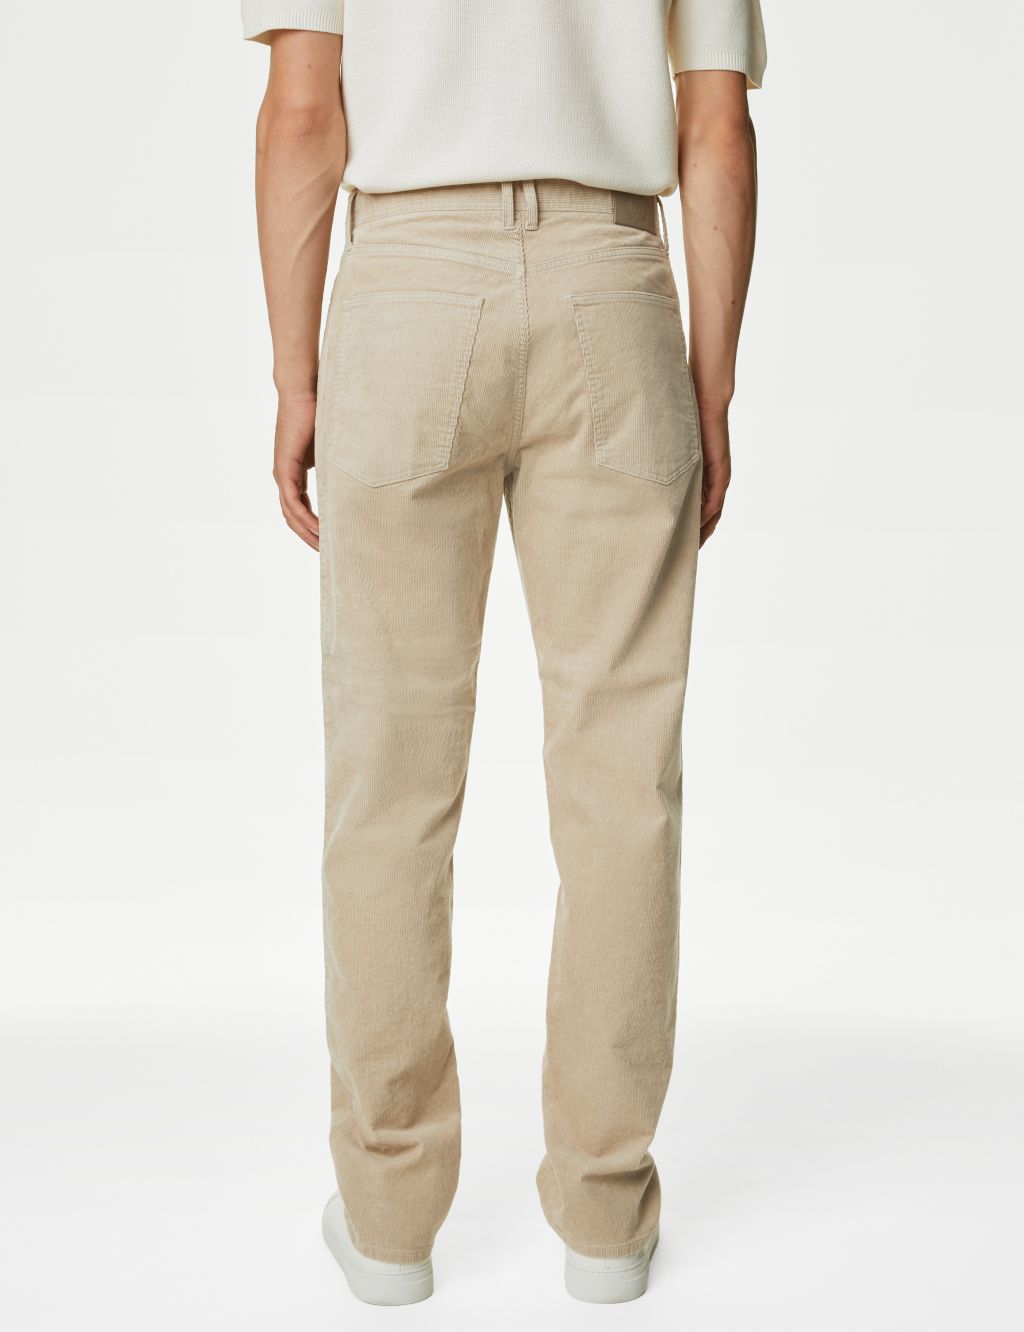 Straight Fit Corduroy 5 Pocket Trousers image 4